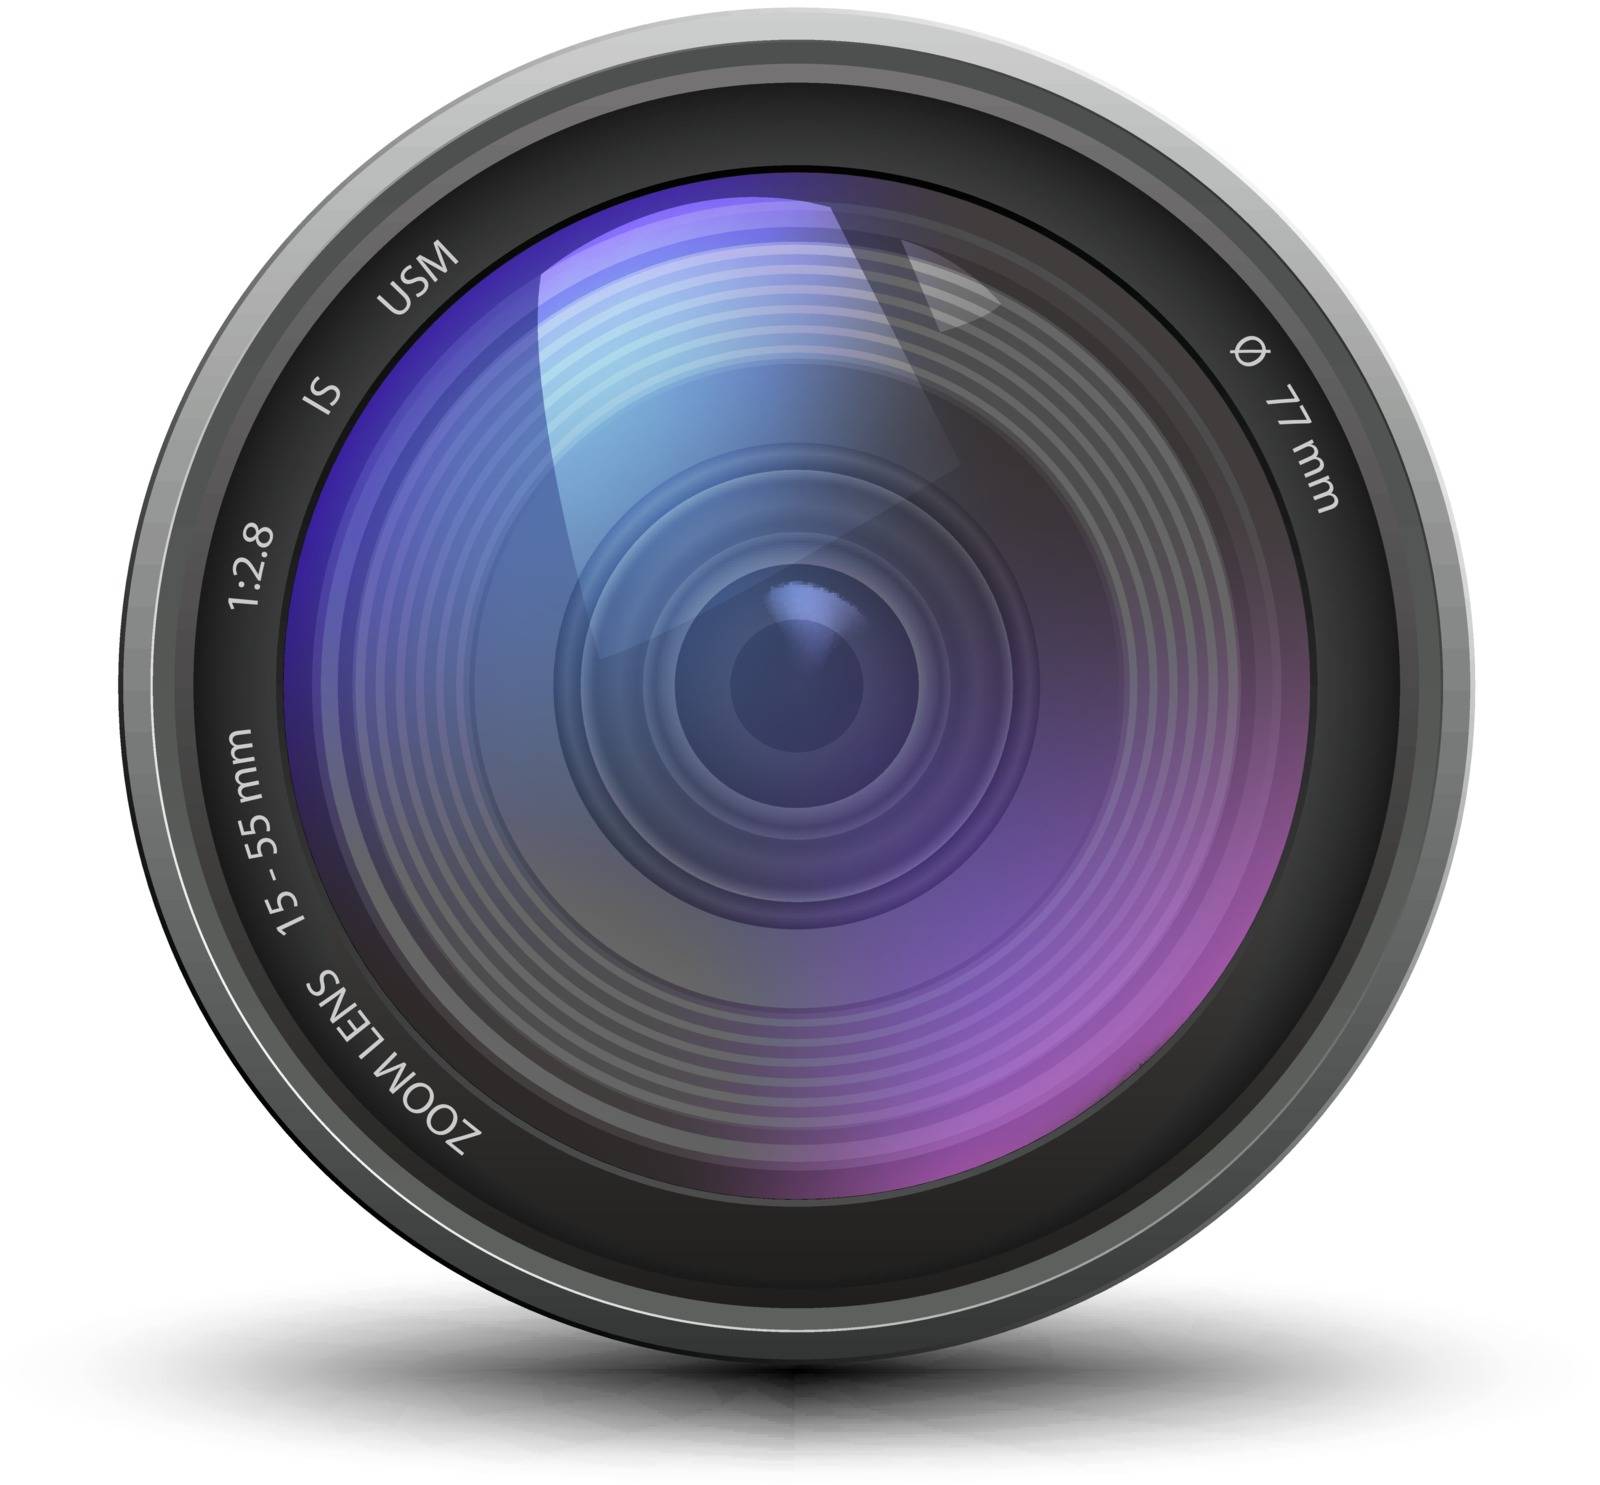 Realistic vector illustration of a camera zoom lens with cool colorful reflection